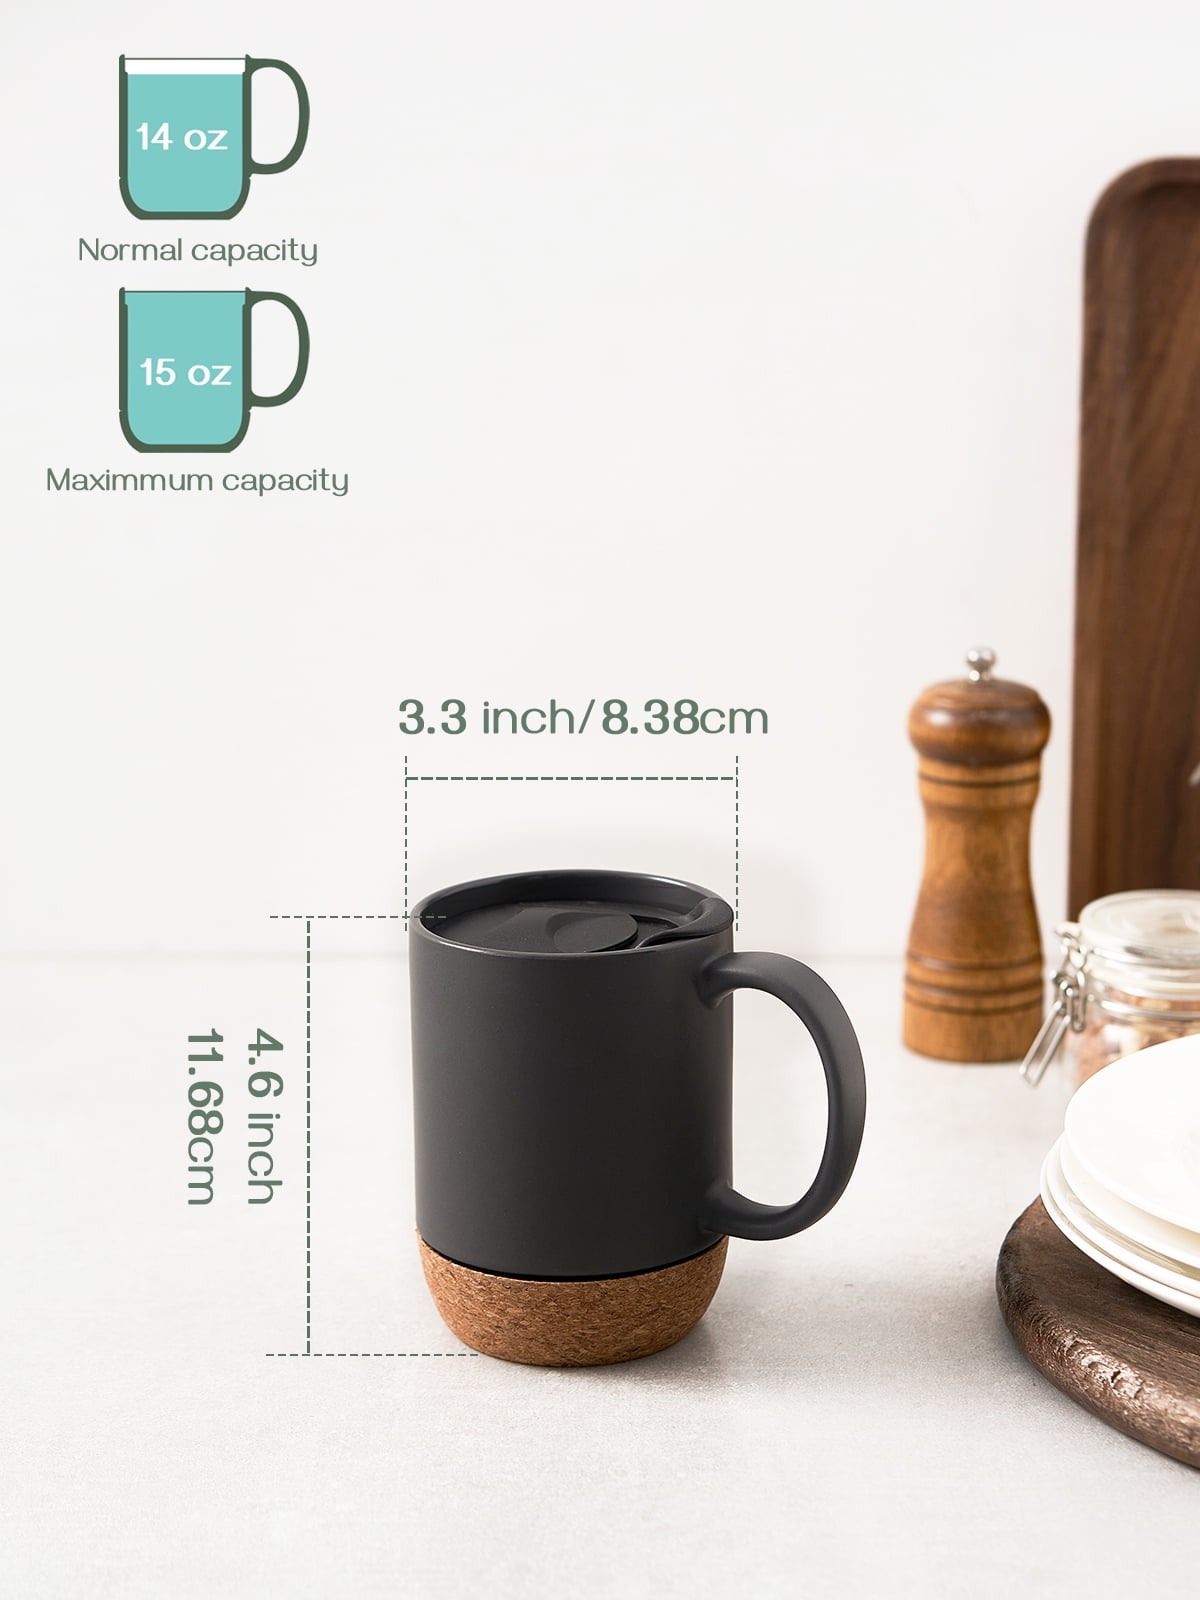 Aoibox 15 oz. Large Ceramic Coffee Mug with Cork Bottom and Spill Proof Lid,  Set of 2, Matte Black SNPH002IN395 - The Home Depot